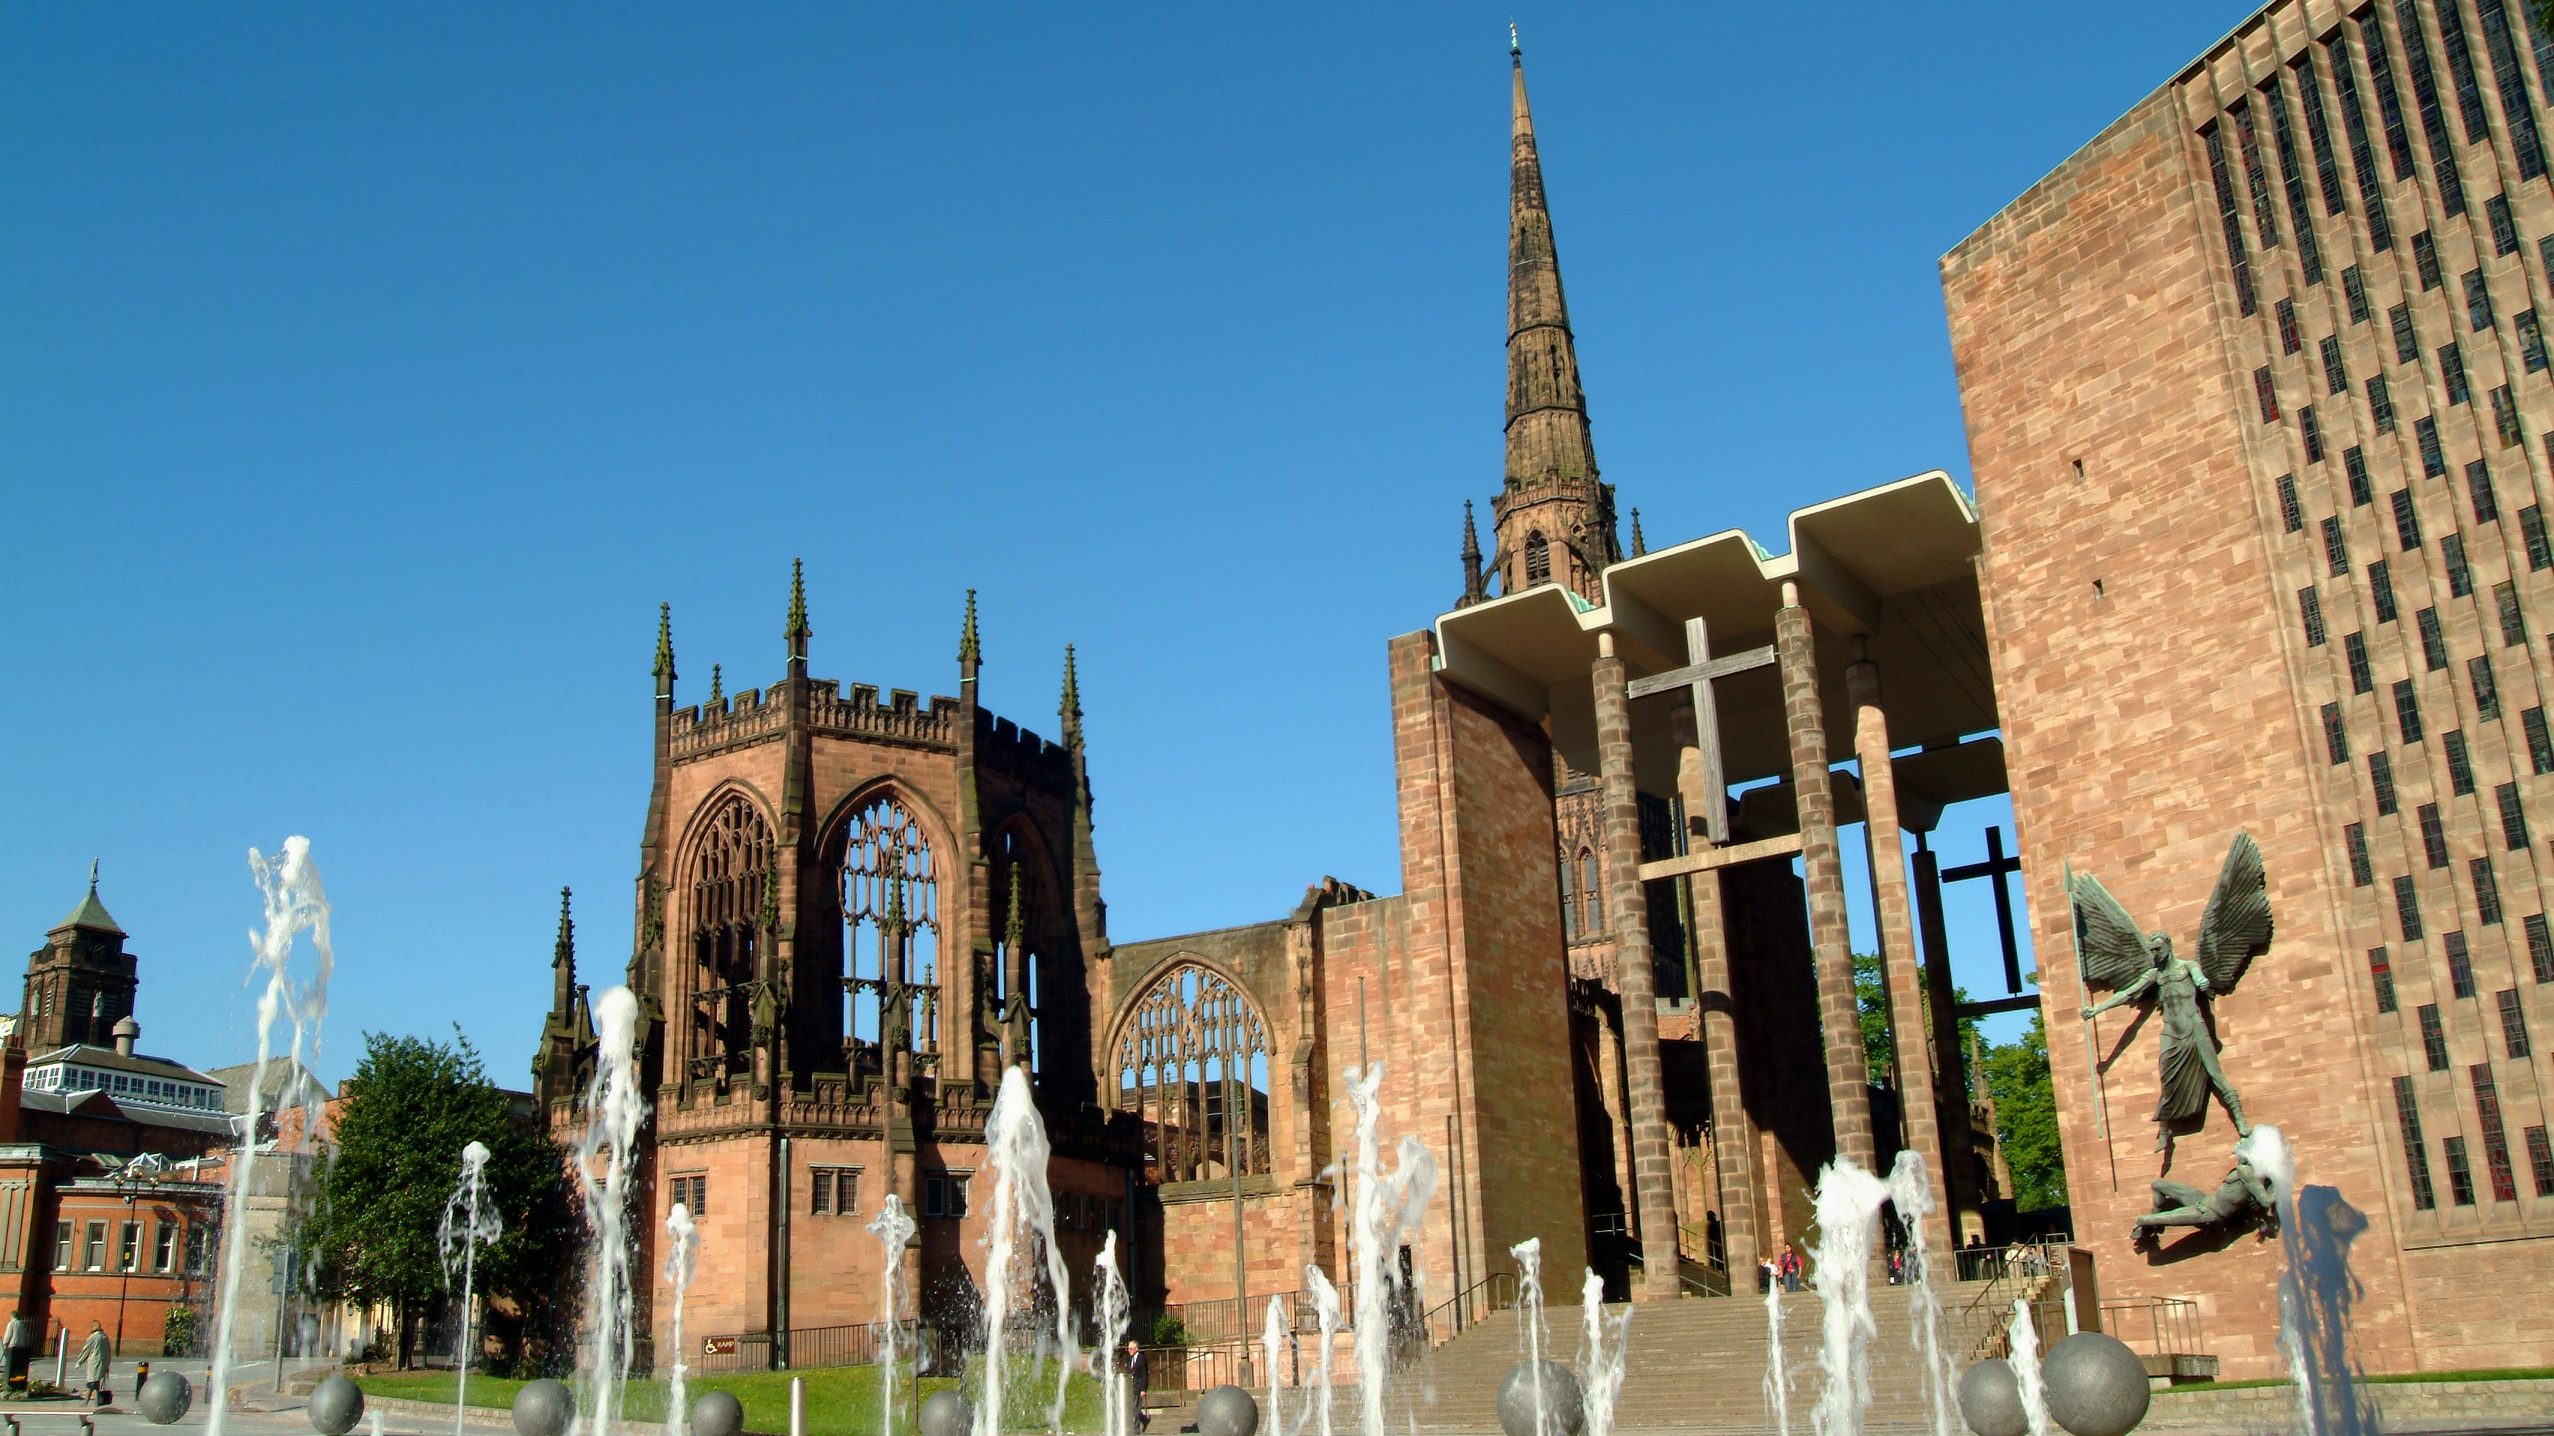 Coventry & Warks amongst locations identified for emerging industries